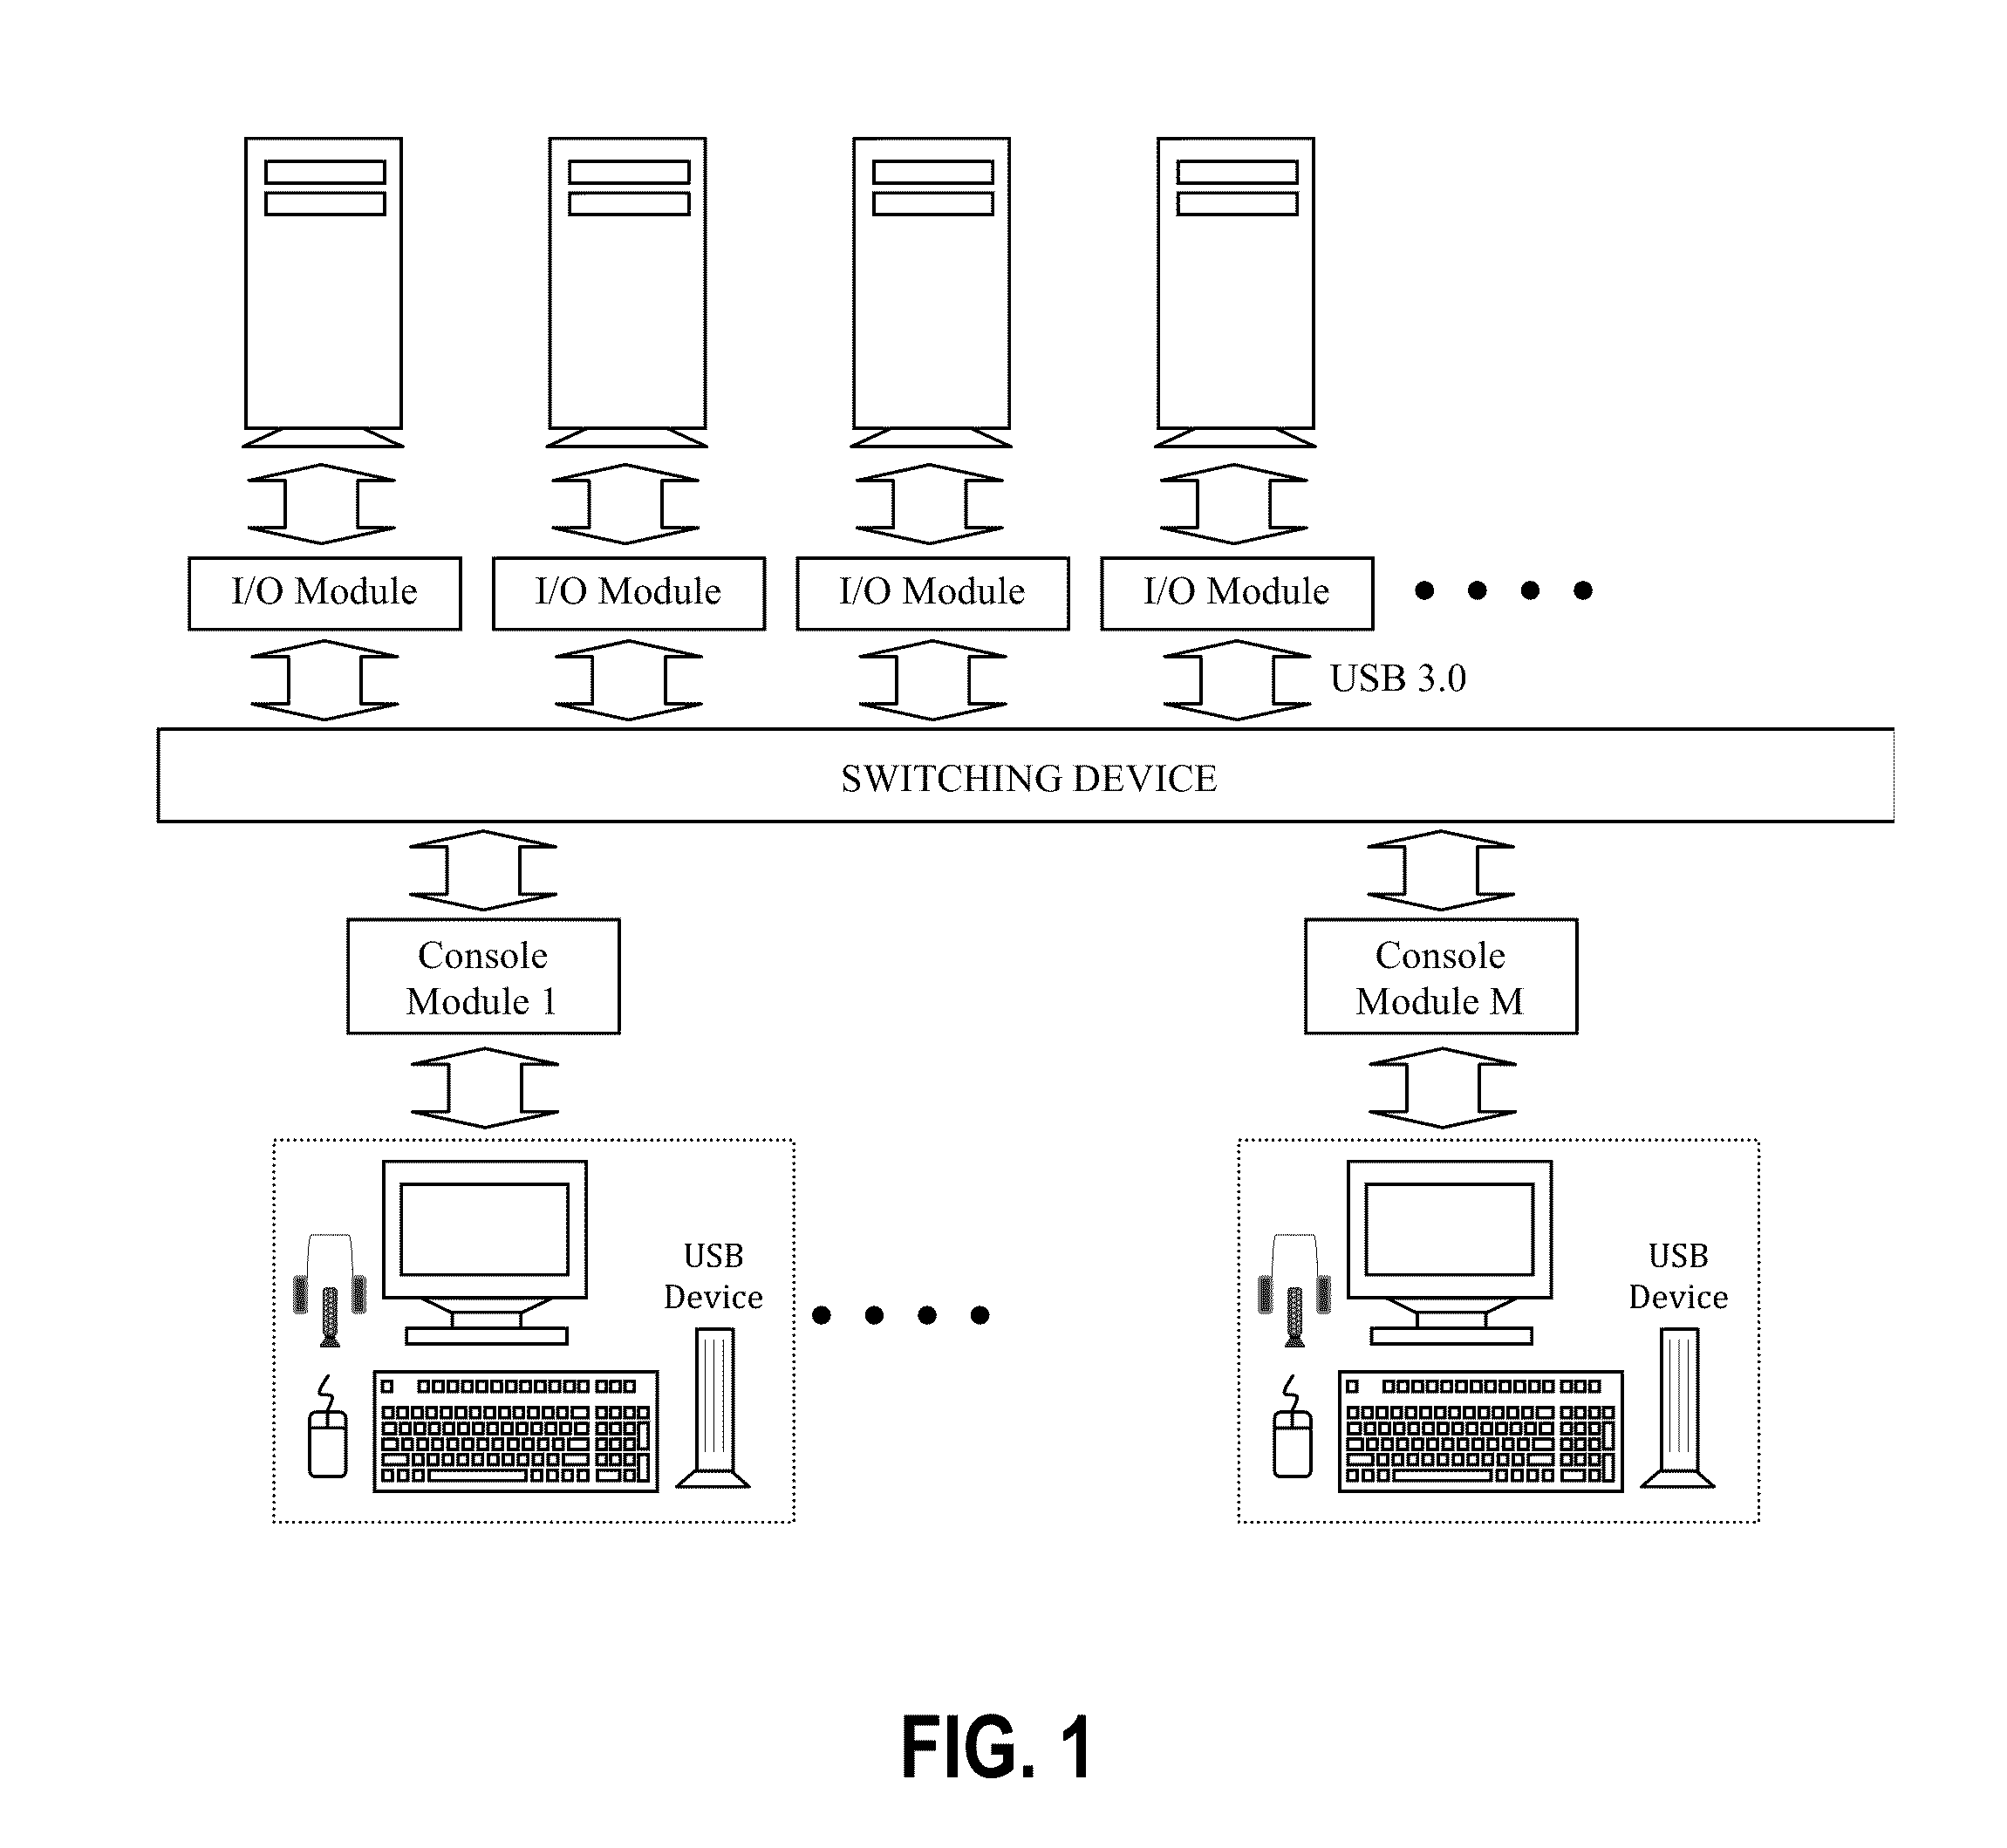 Method and Apparatus of USB 3.0 Based Computer, Console and Peripheral Sharing